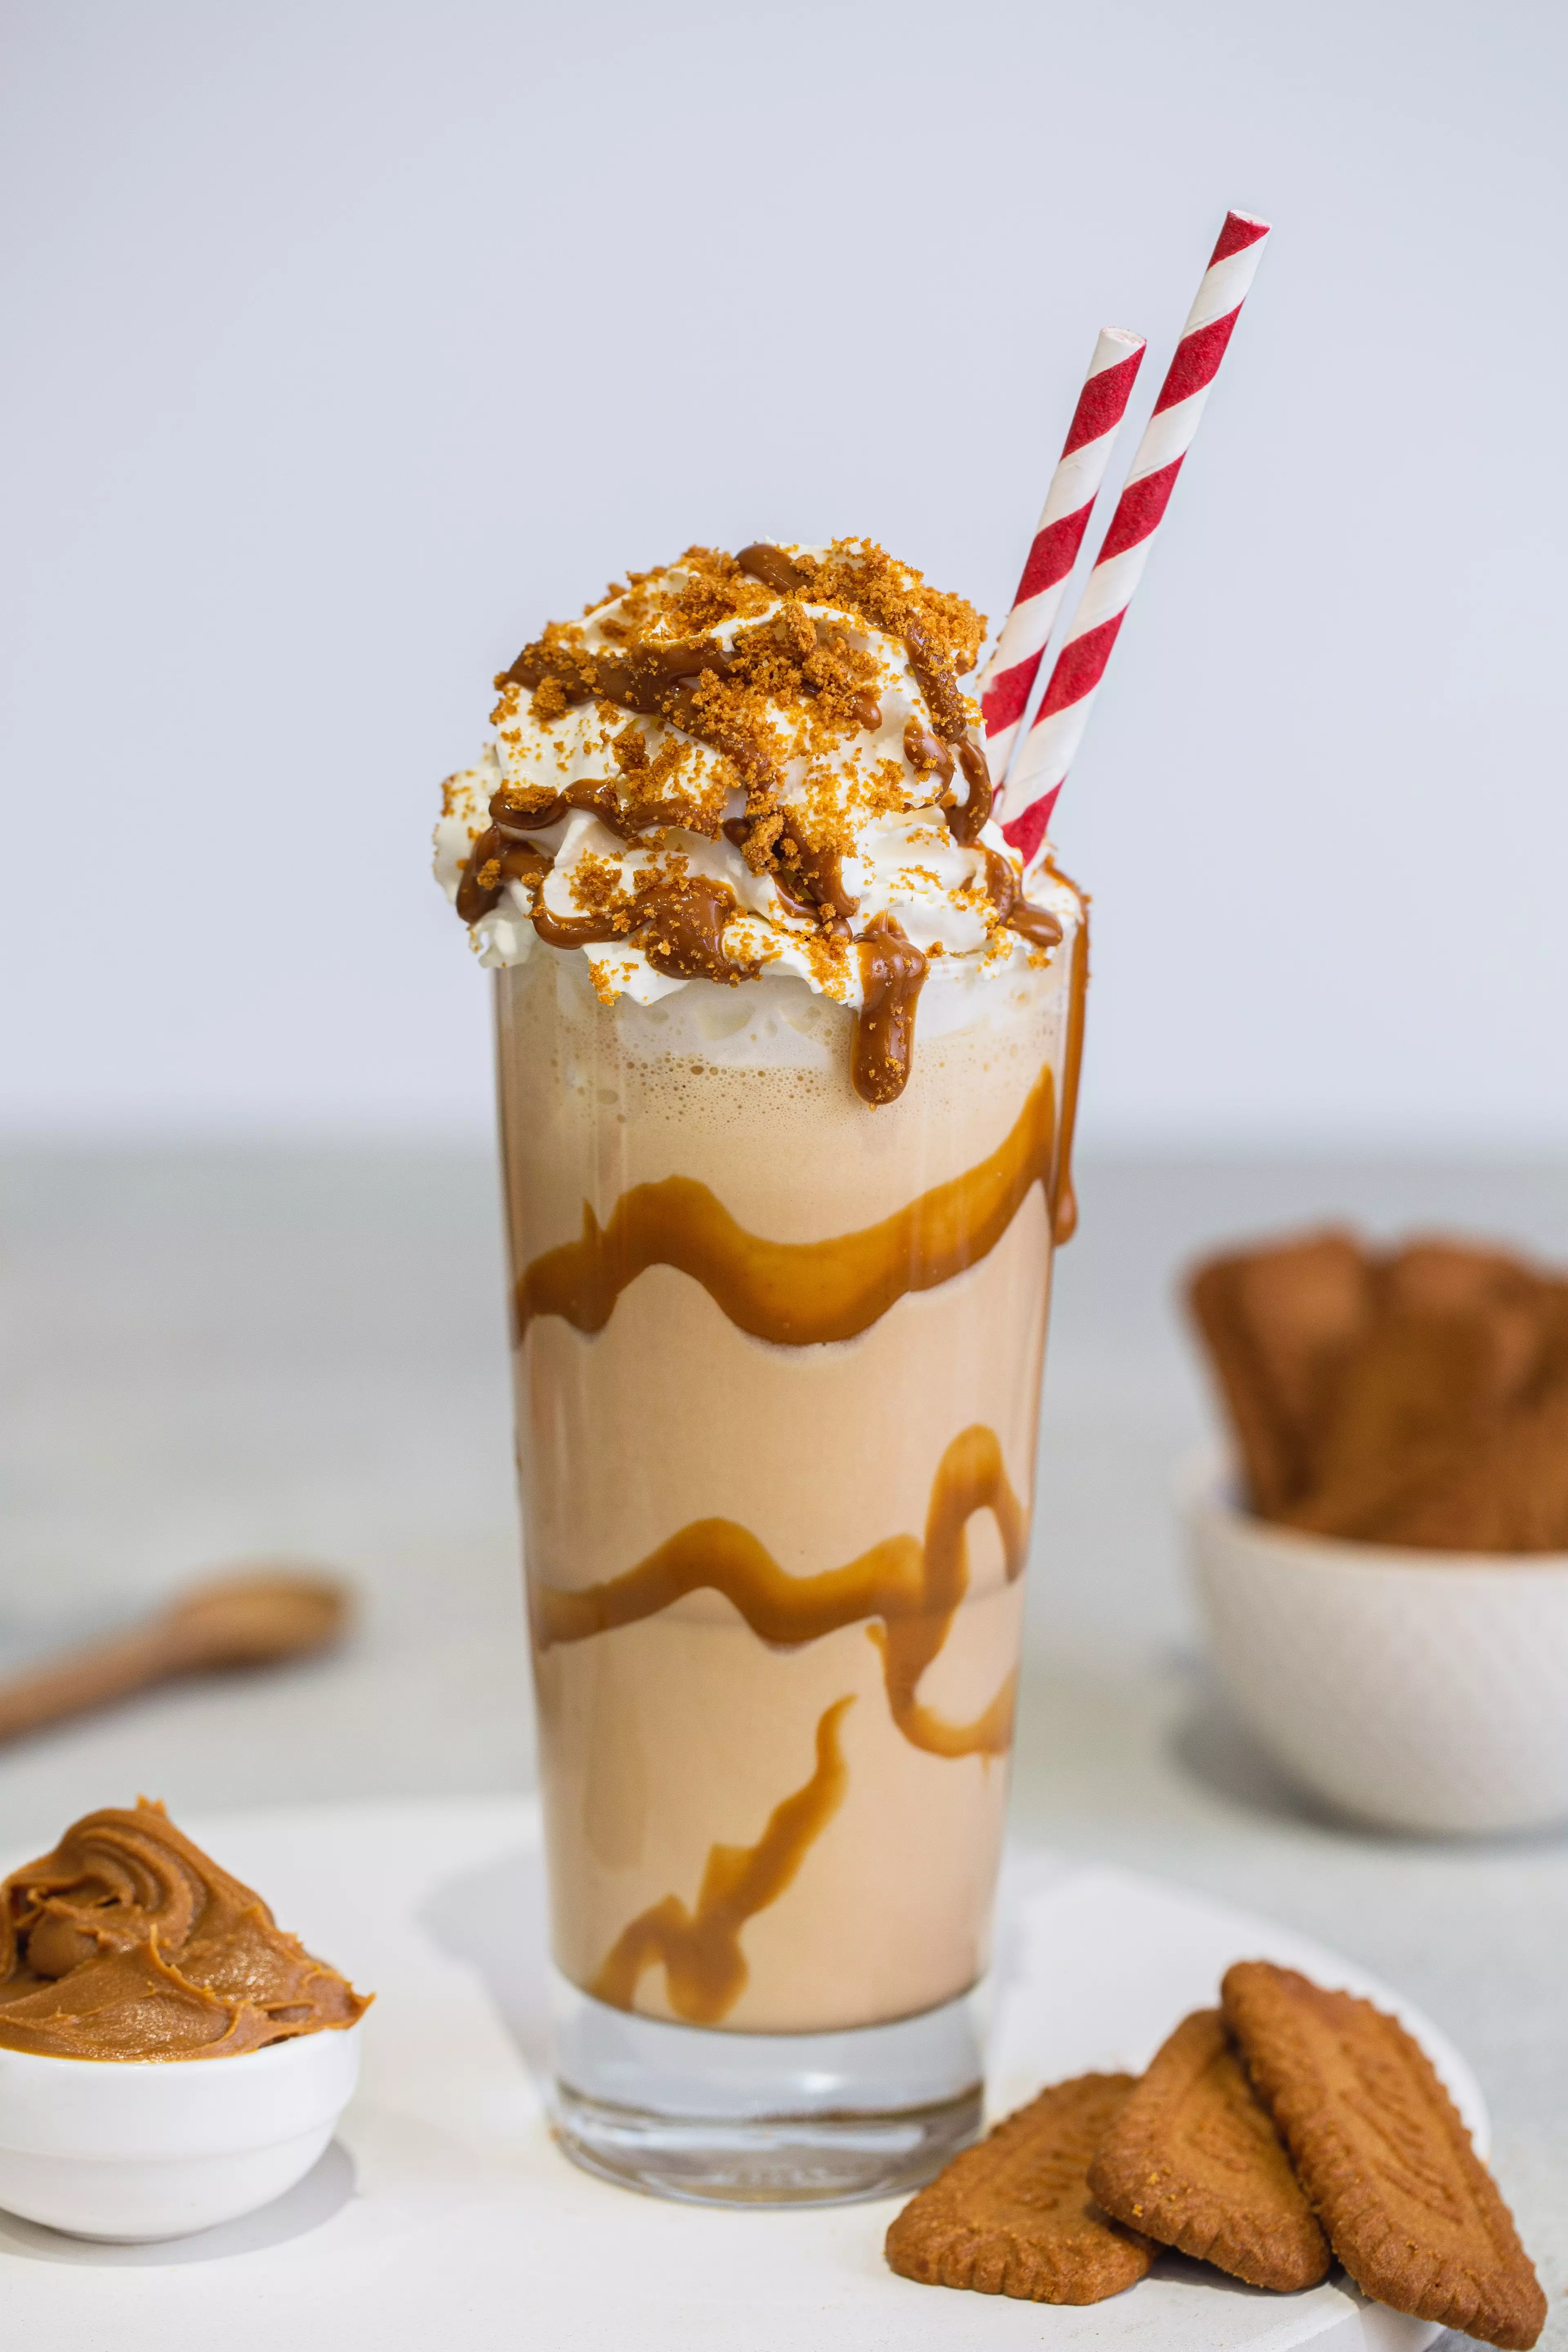 You can also try this Biscoff Milkshake (